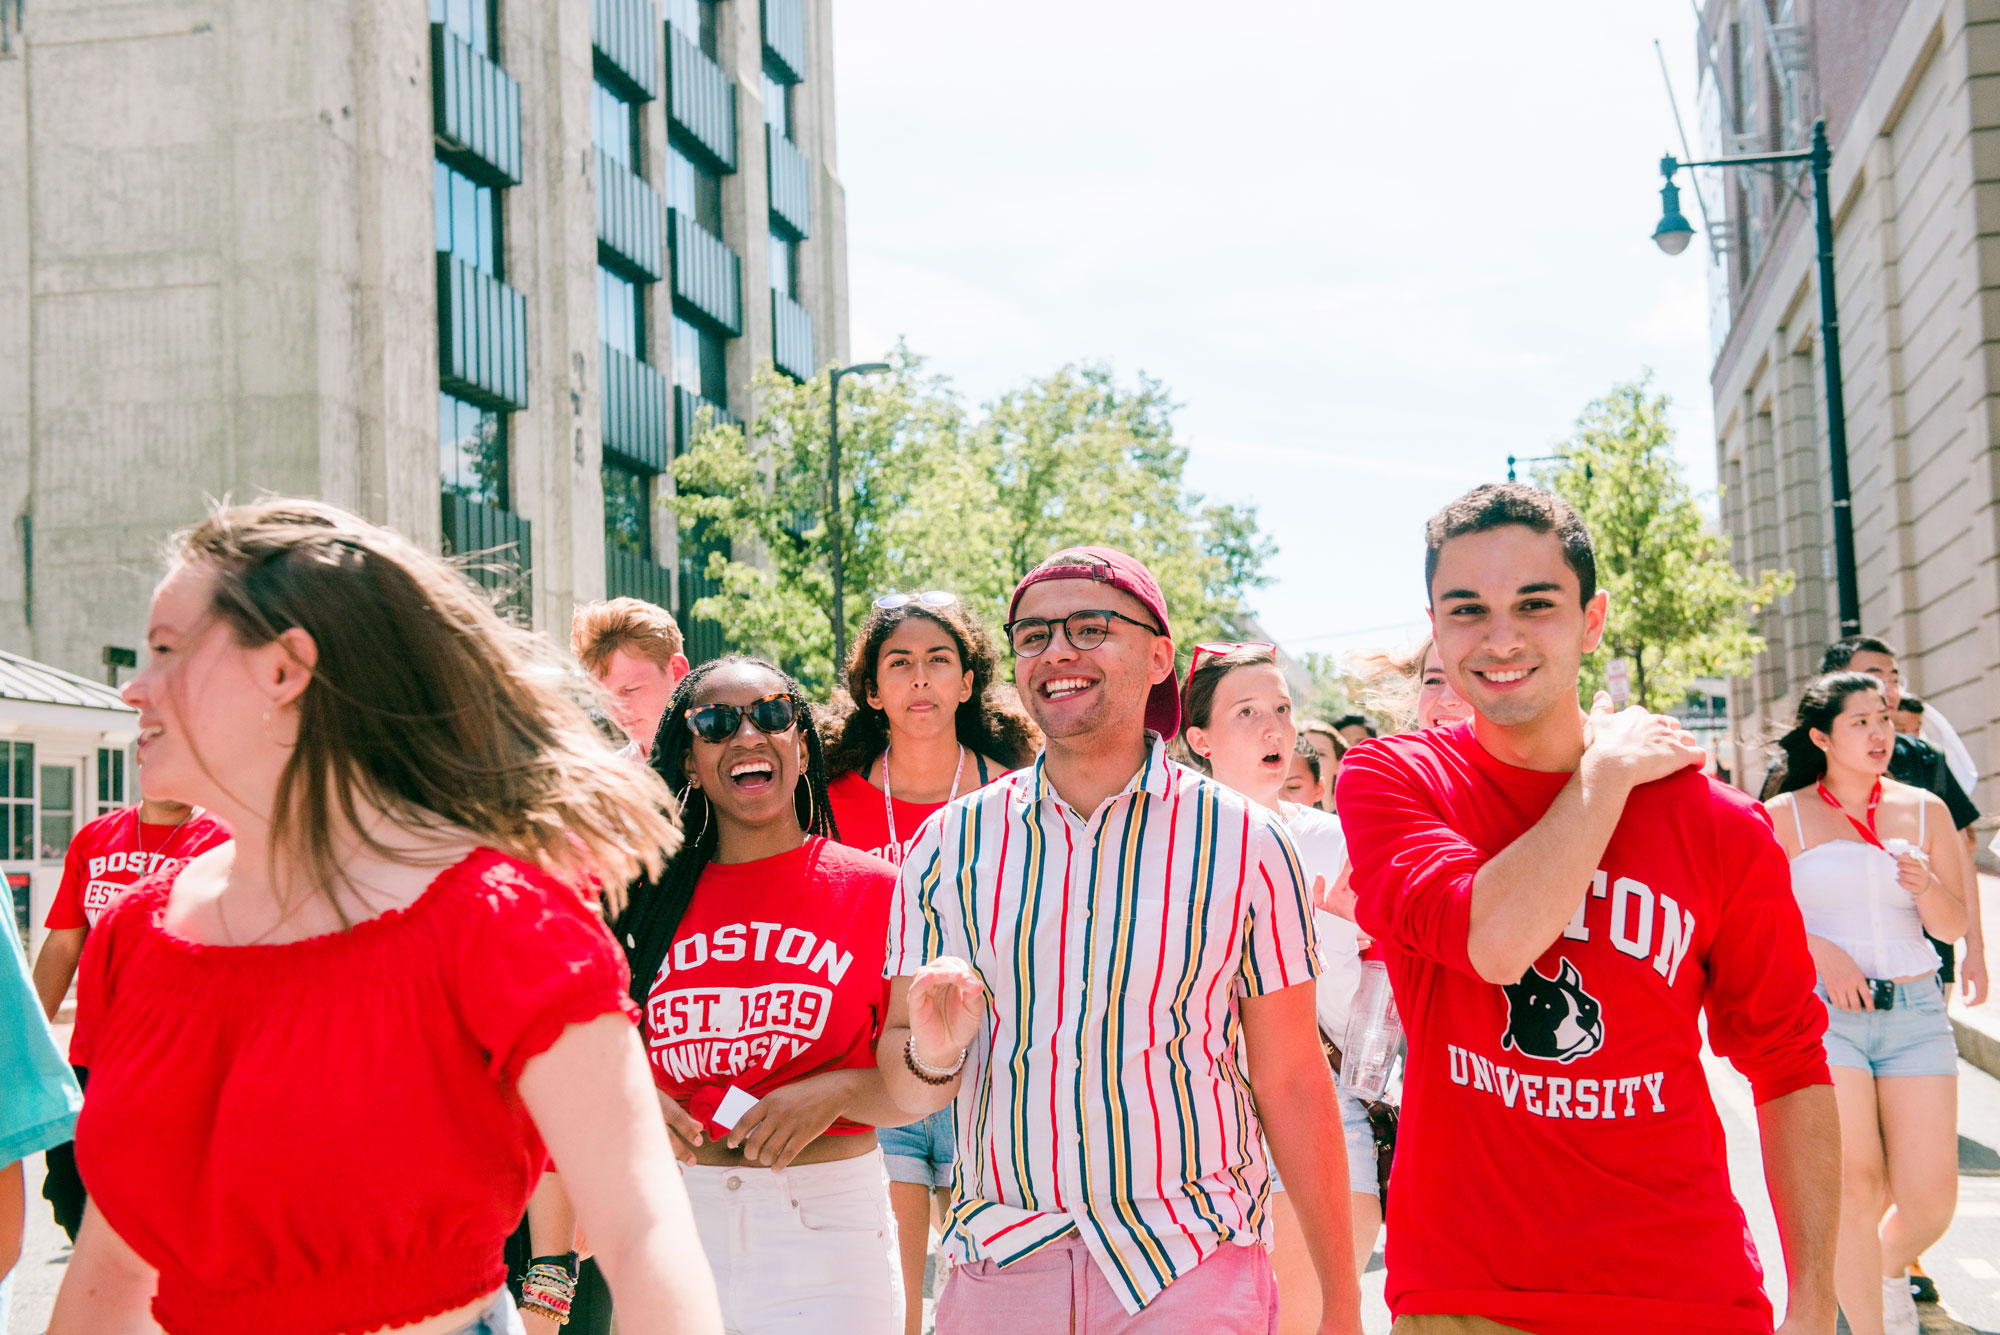 Students sporting Boston University apparel walk down comm ave, during the matriculation parade